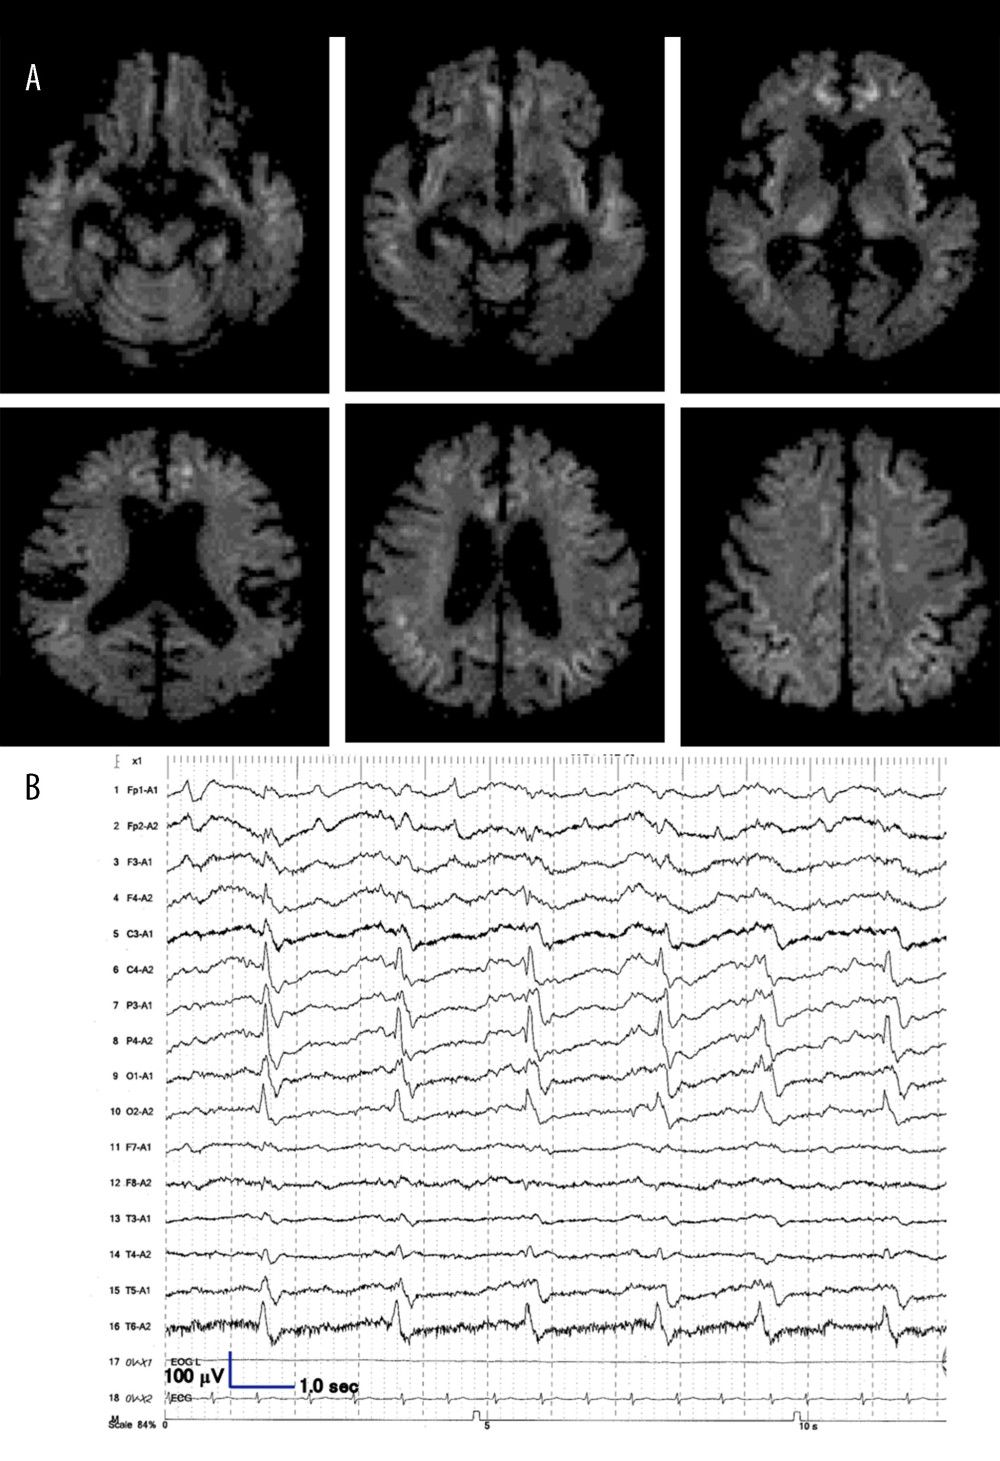 (A) Diffusion-weighted imaging of brain magnetic resonance imaging (MRI) at the time of the patient’s worst clinical condition. Diffuse hyperintensity lesions are seen in the cortices of bilateral frontal, parietal, and insular areas and in bilateral thalami. (B) Periodic sharp wave complexes (PSWCs) are noted on the electro-encephalogram. This was recorded at almost the same time as the MRI in A above.